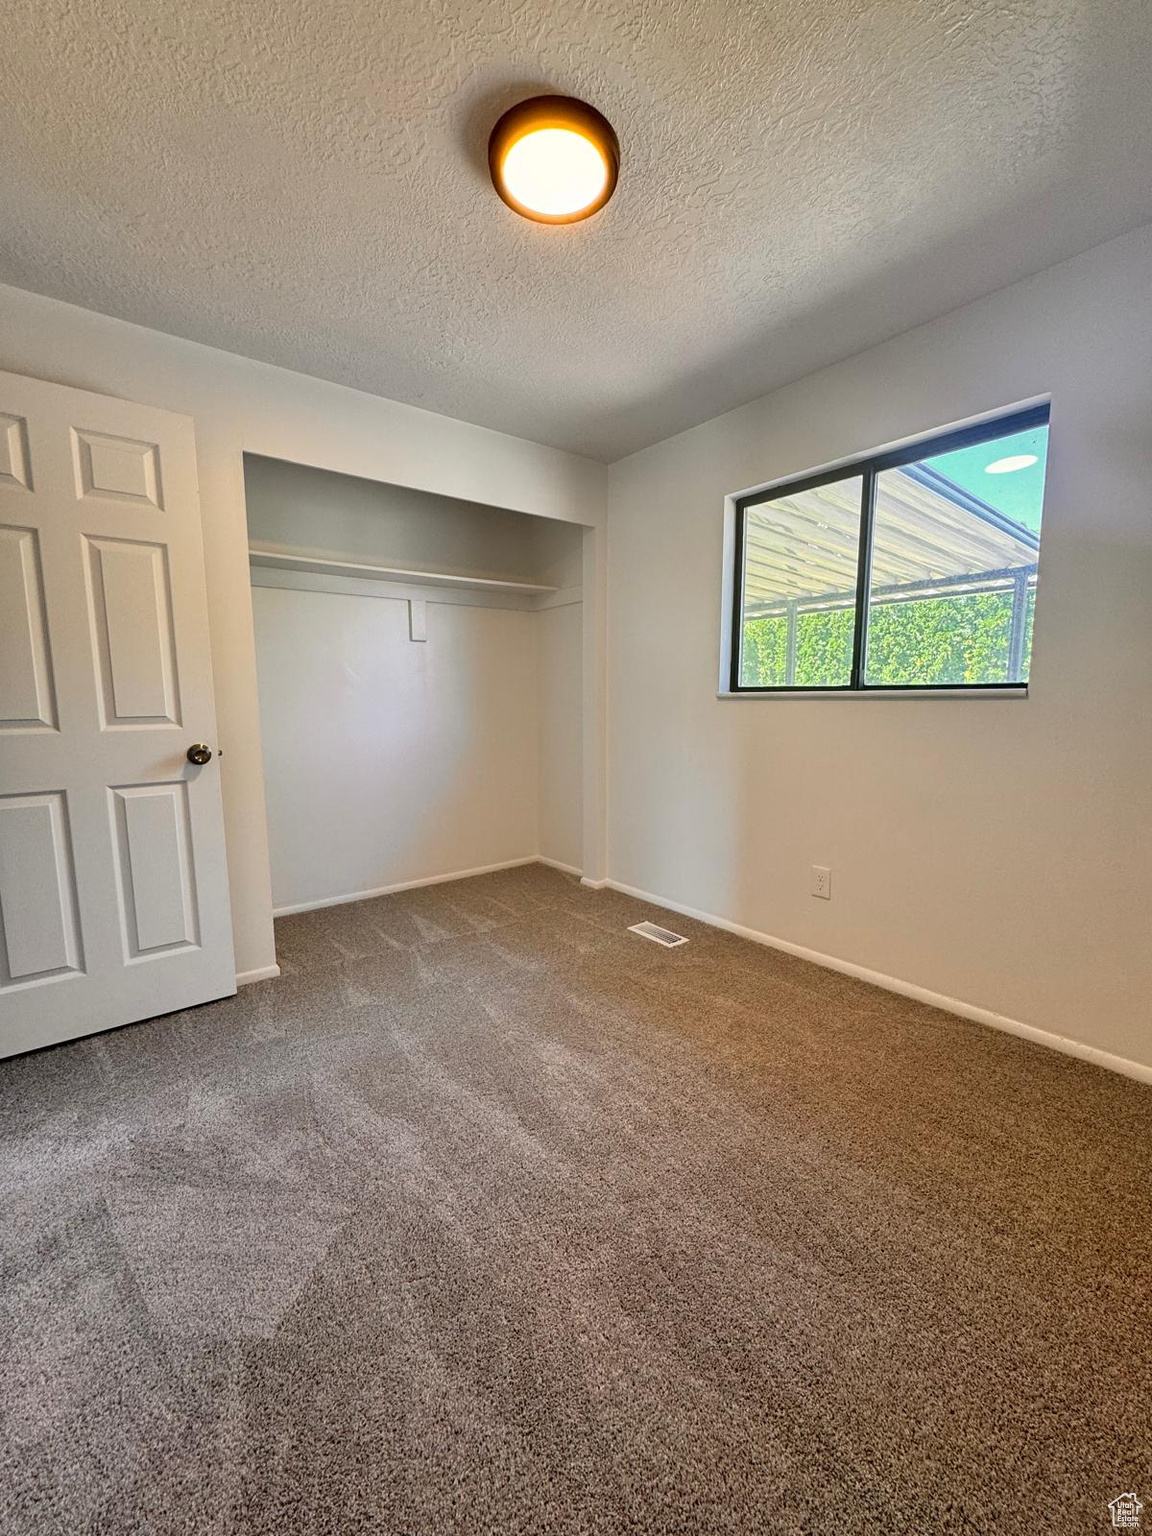 Unfurnished bedroom featuring a closet, a textured ceiling, and carpet floors